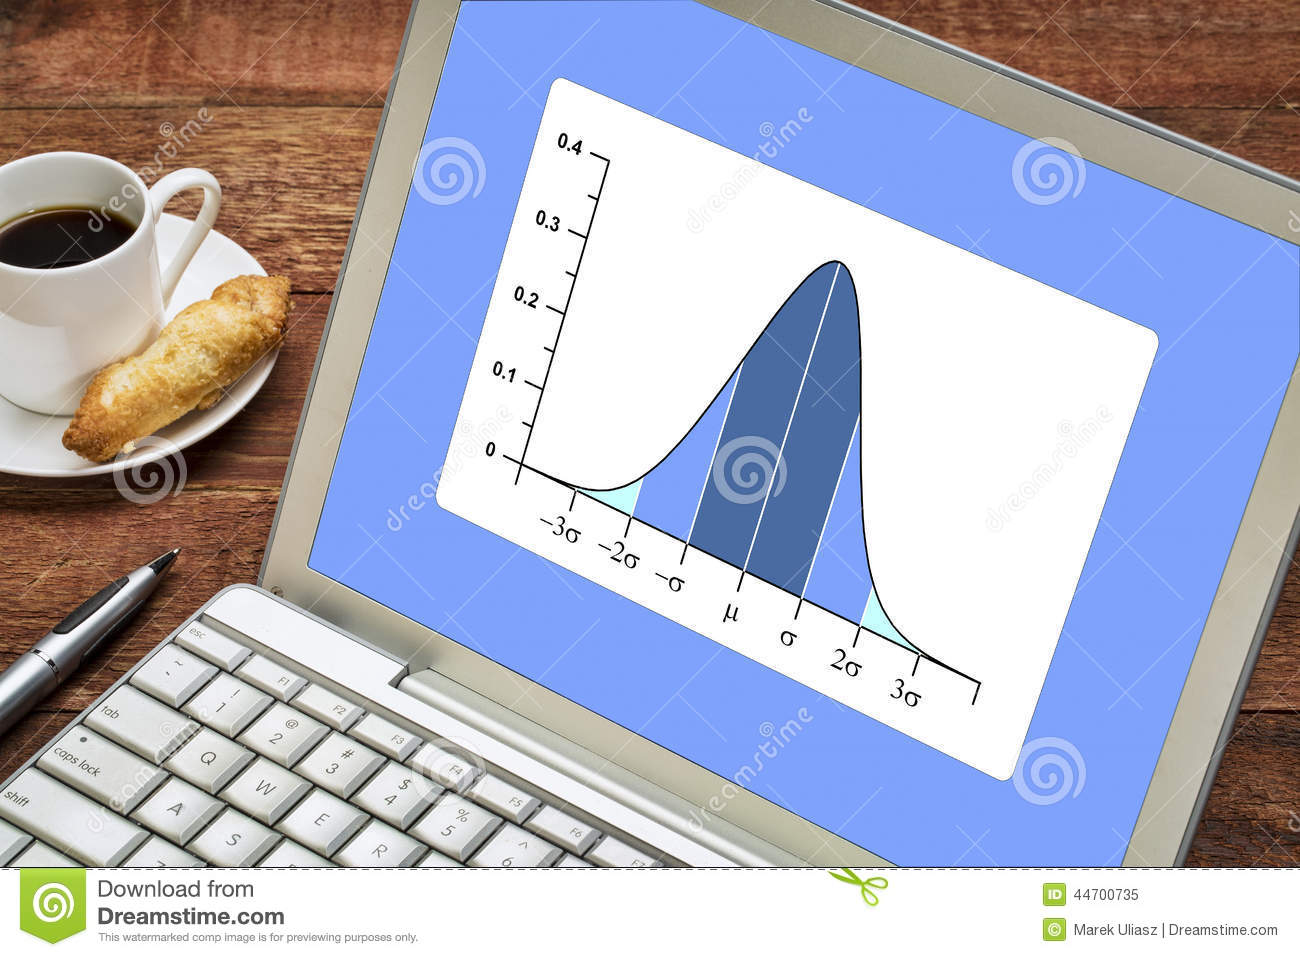 Gaussian Bell Or Normal Distribution Curve On Laptop Computer With A